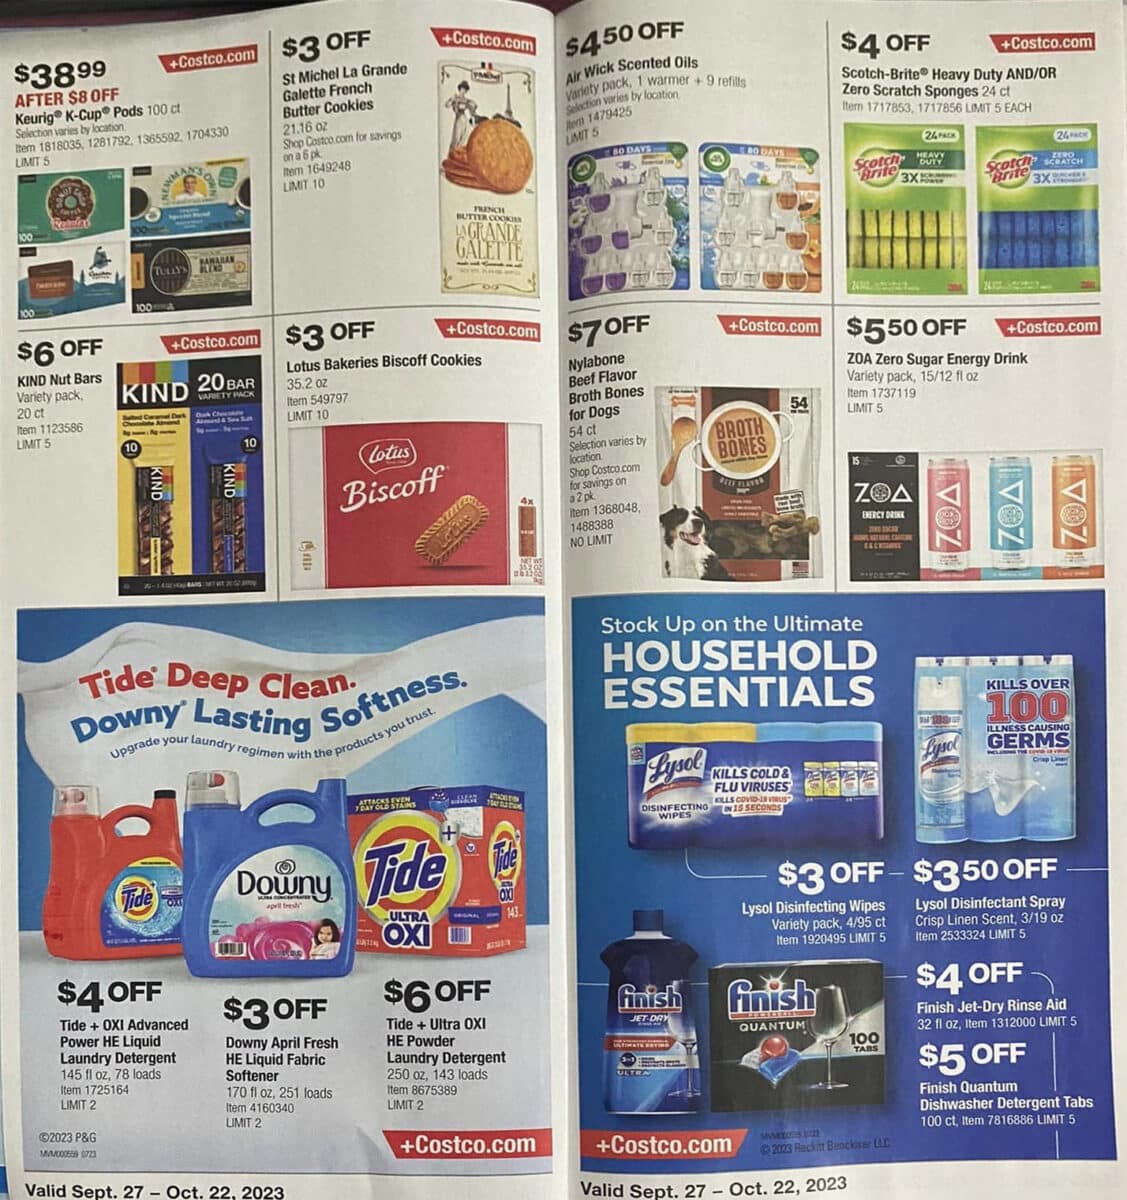 Costco Coupon Book Scan for September October 2023